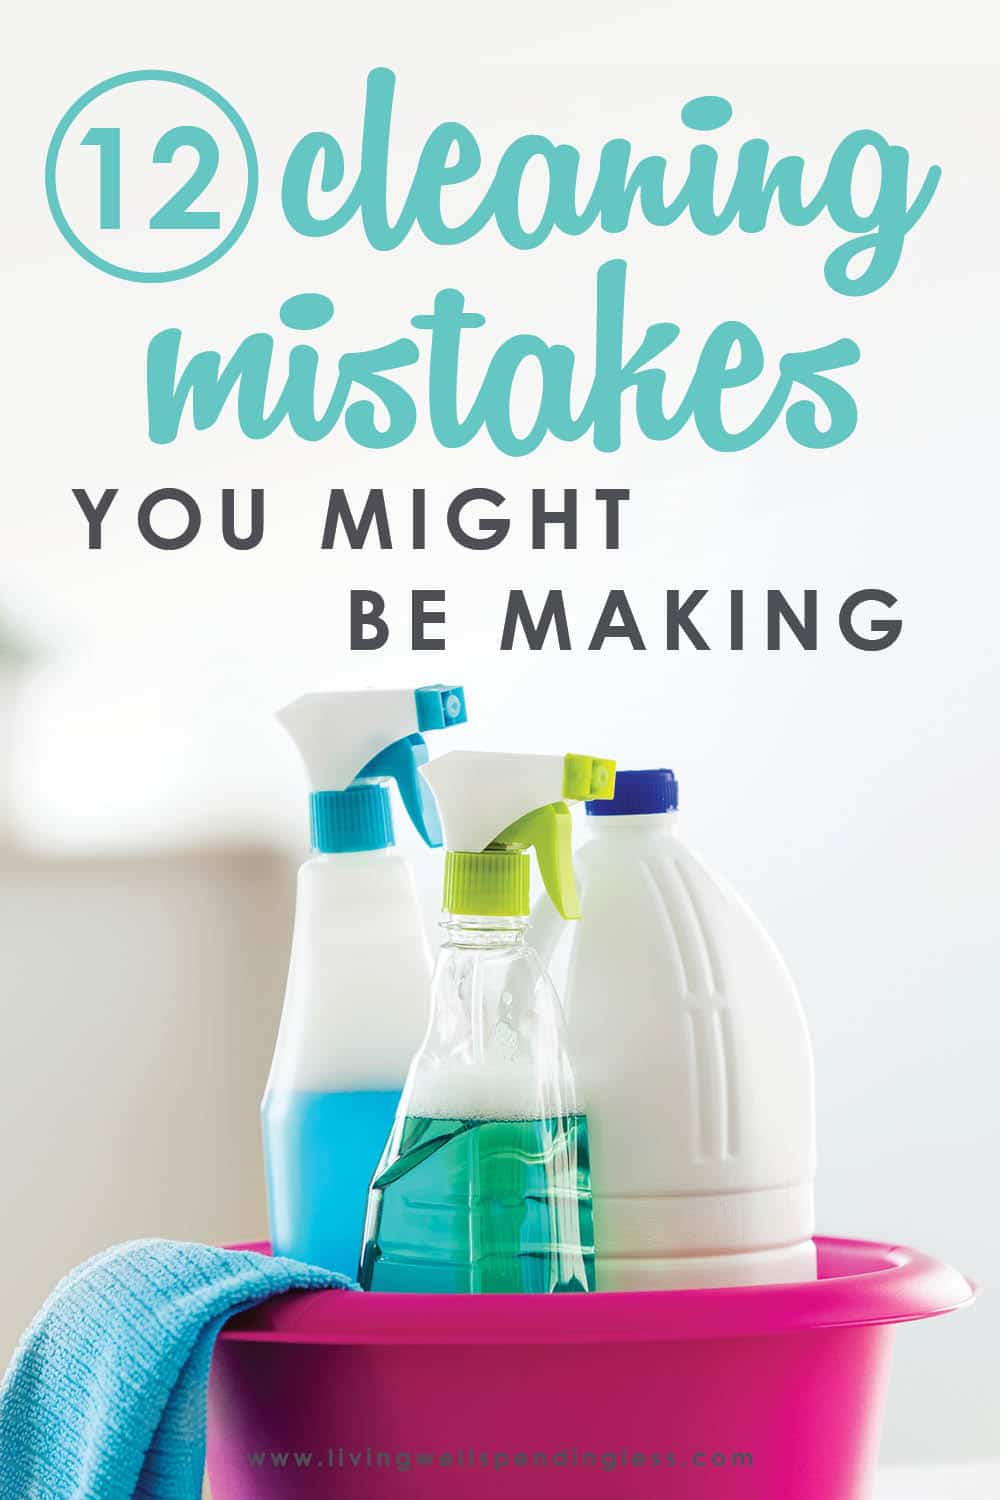 https://www.livingwellspendingless.com/wp-content/uploads/2015/11/12-Cleaning-Mistakes-You-Might-Be-Making_Vertical.jpg